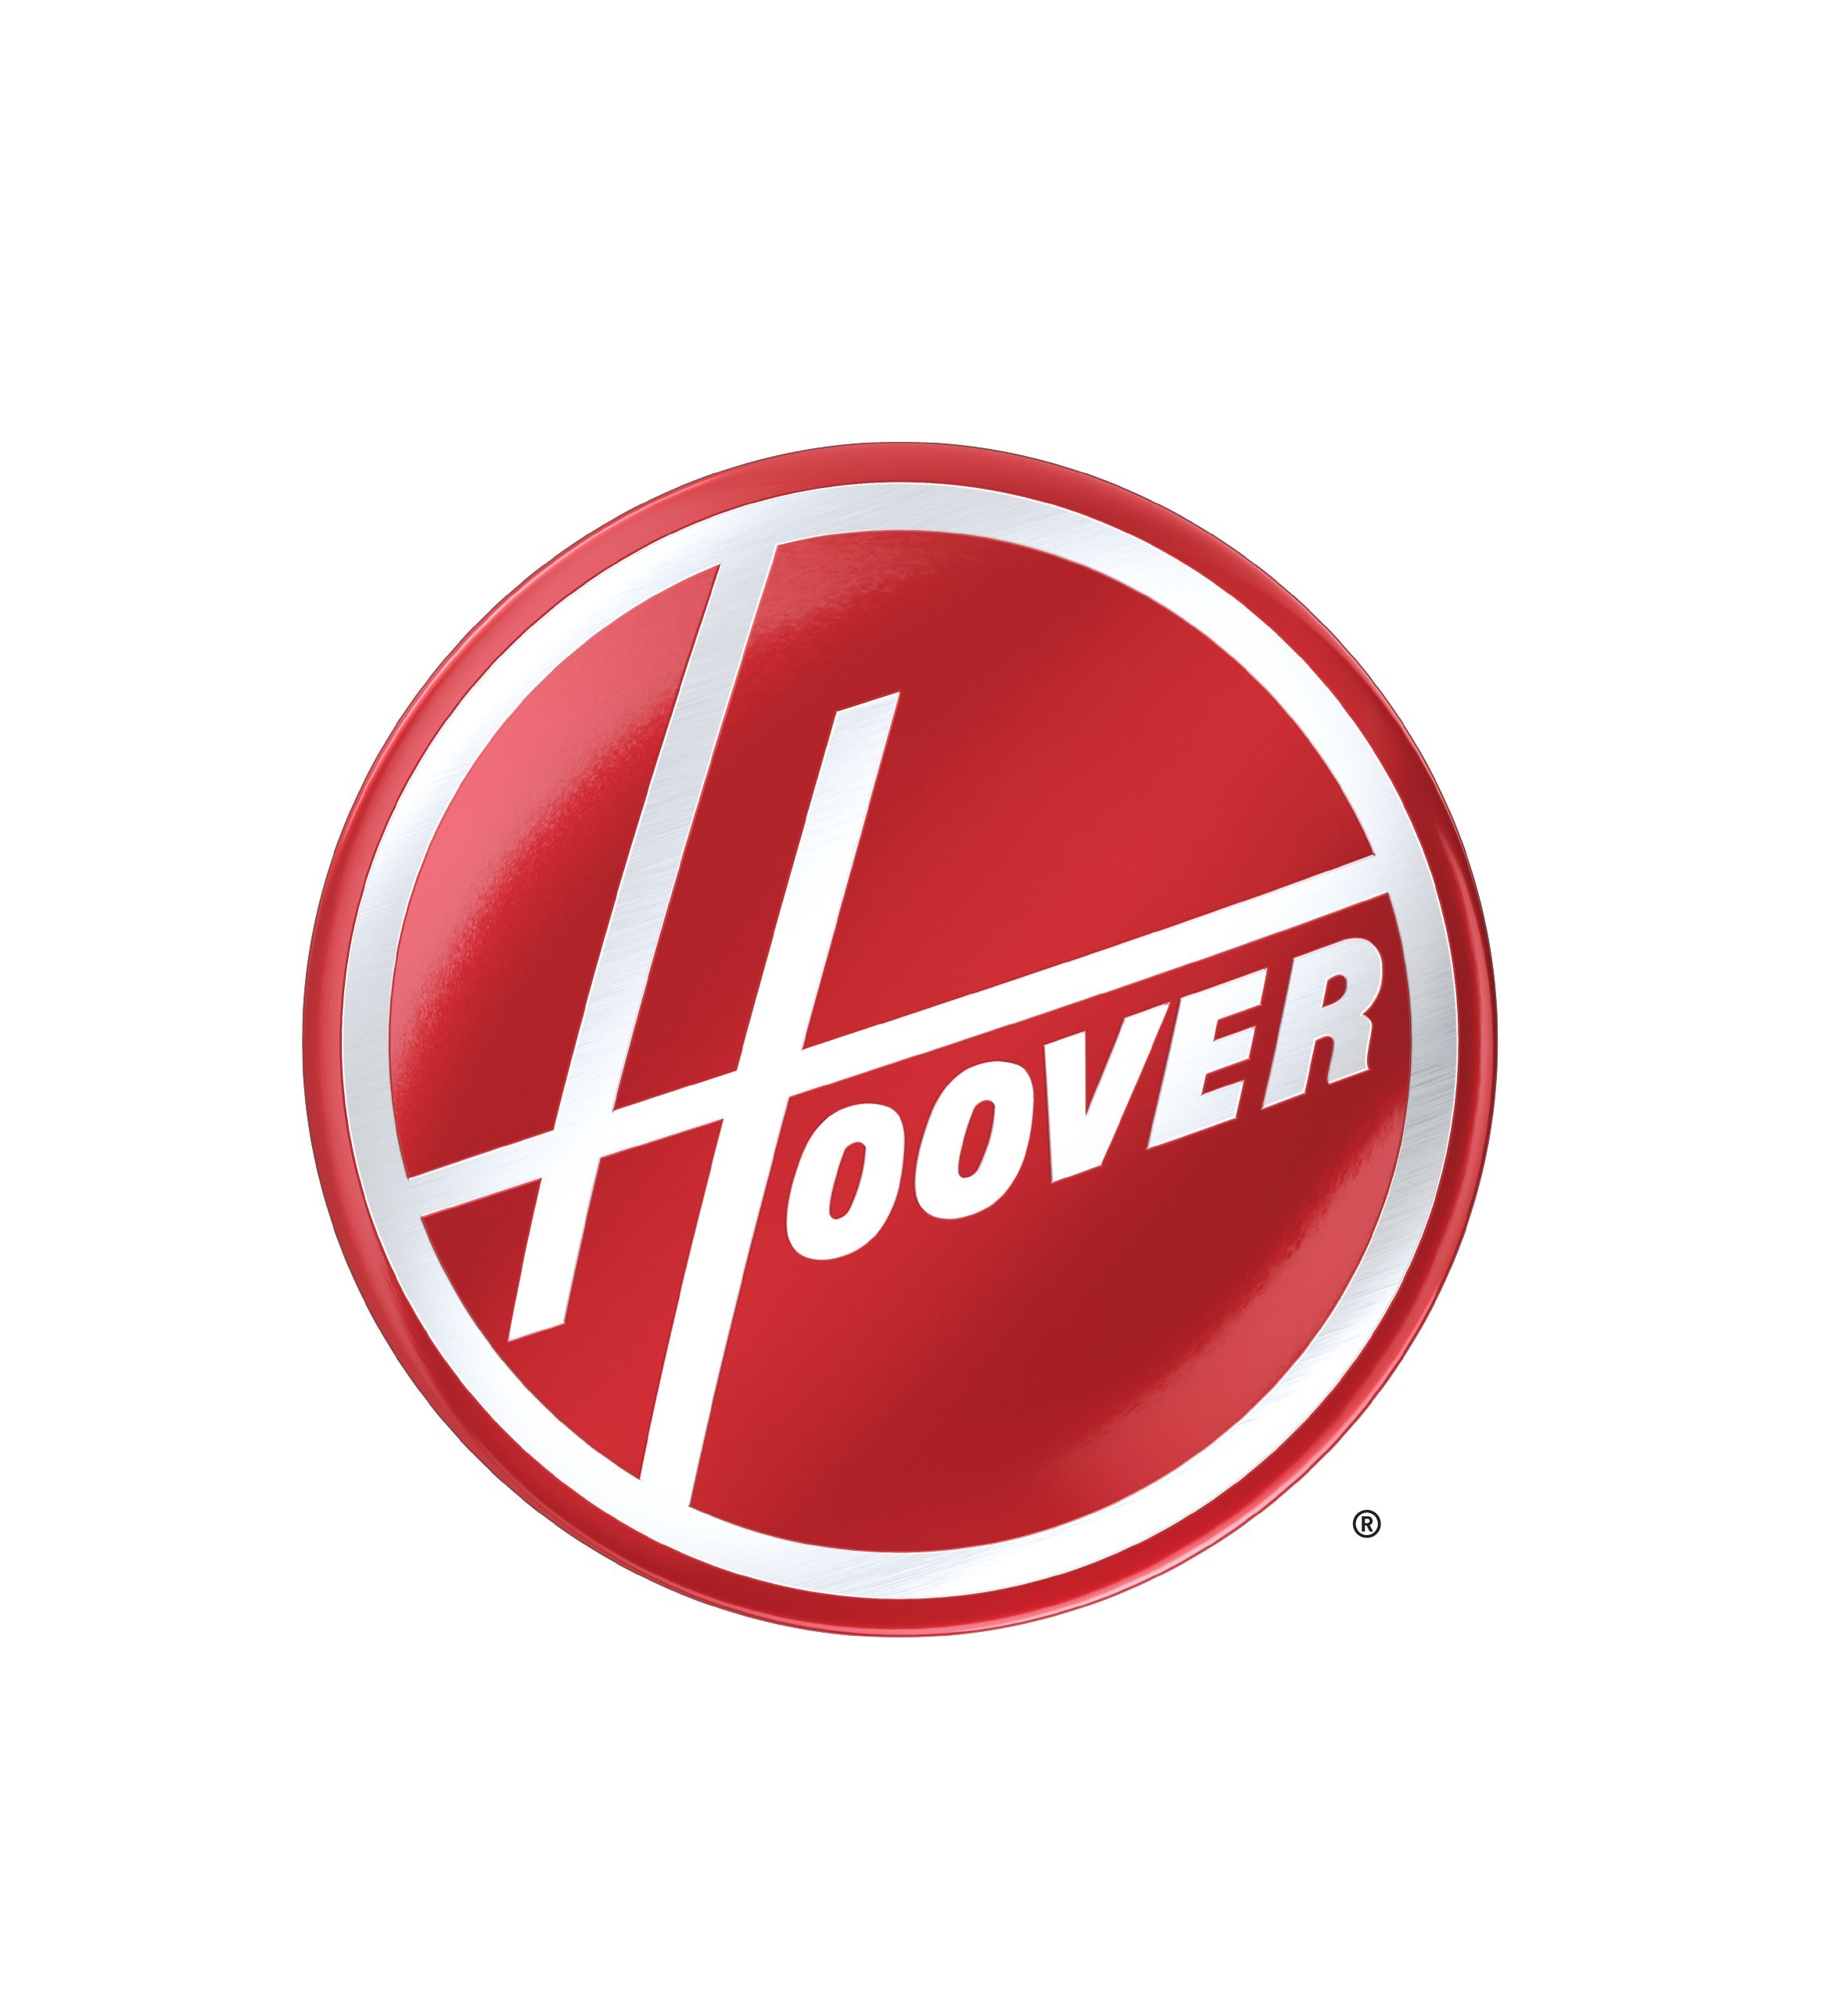 Hoover Redefines the Industry and Brand with "A NEW GENERATION OF CLEAN"